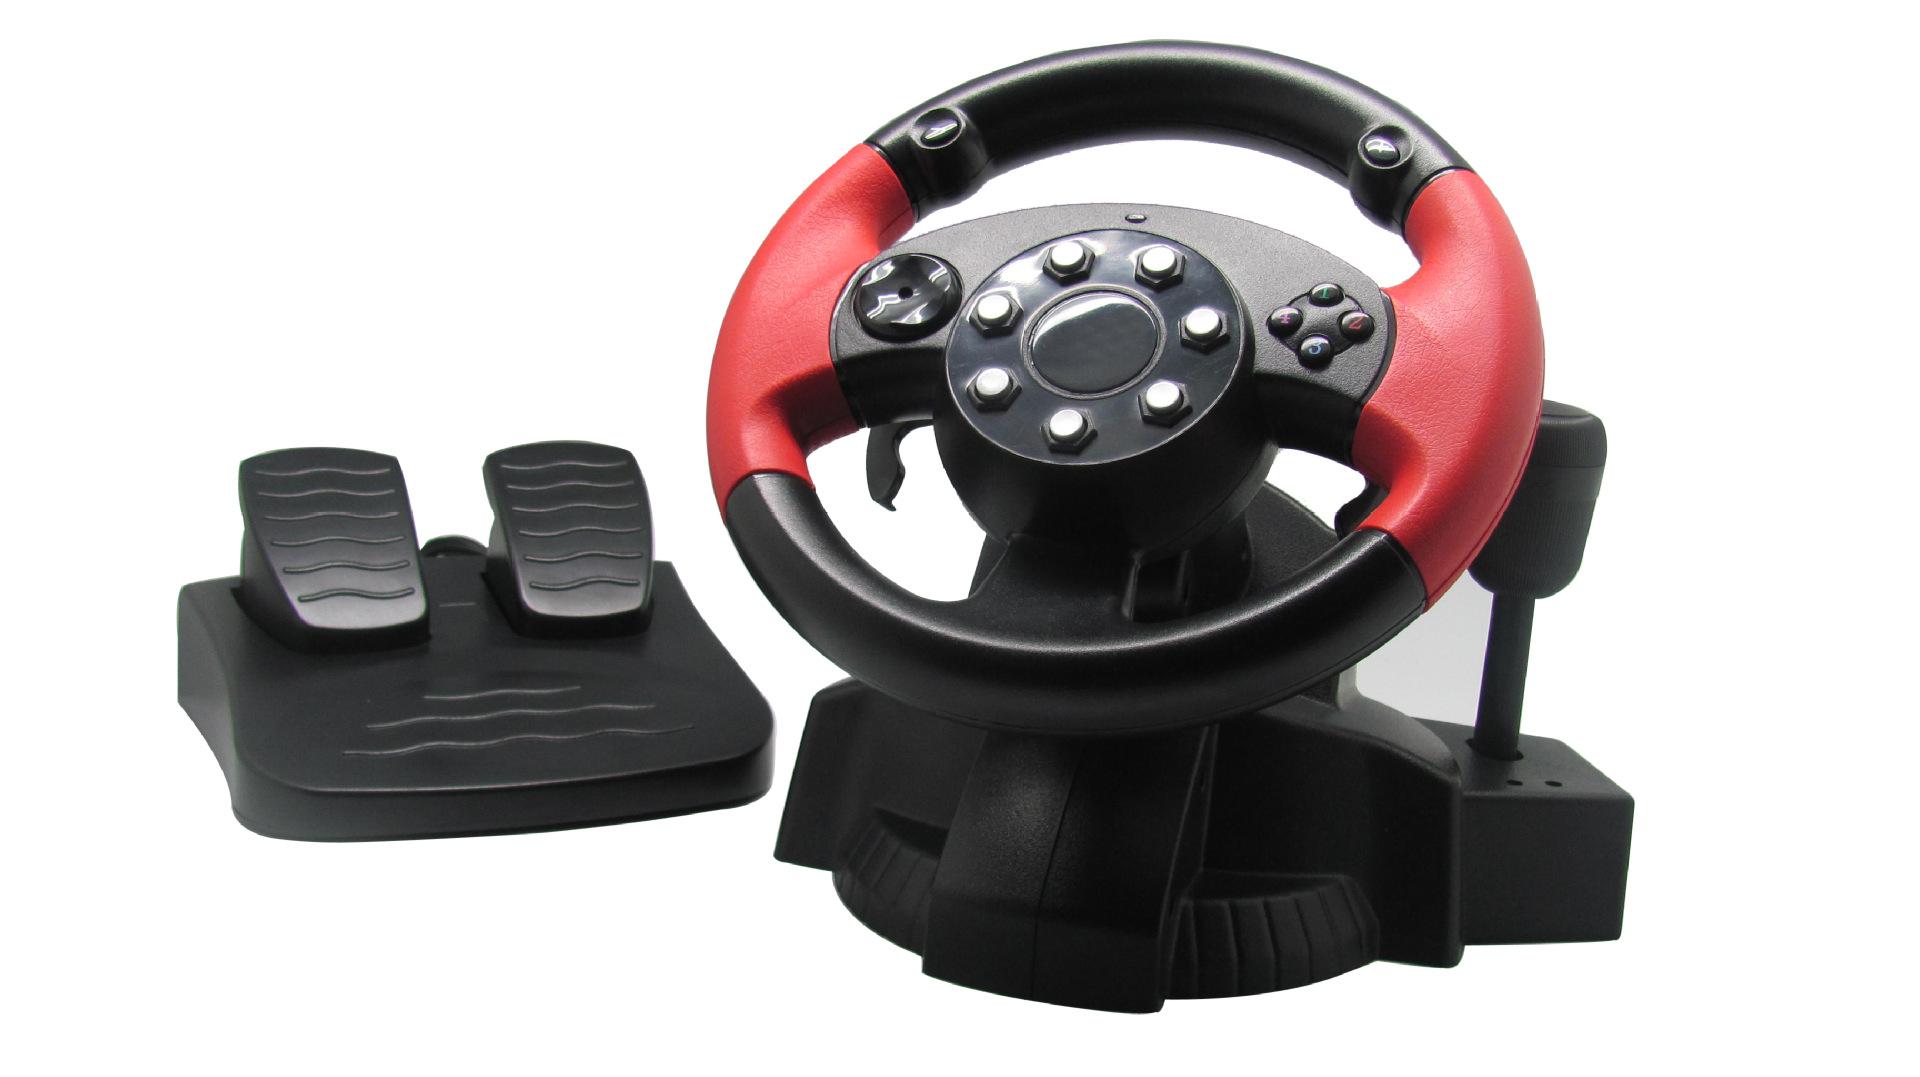 Gaming Vibration Racing Steering Wheel and Brake Pedals Kit for PS3/Ps2